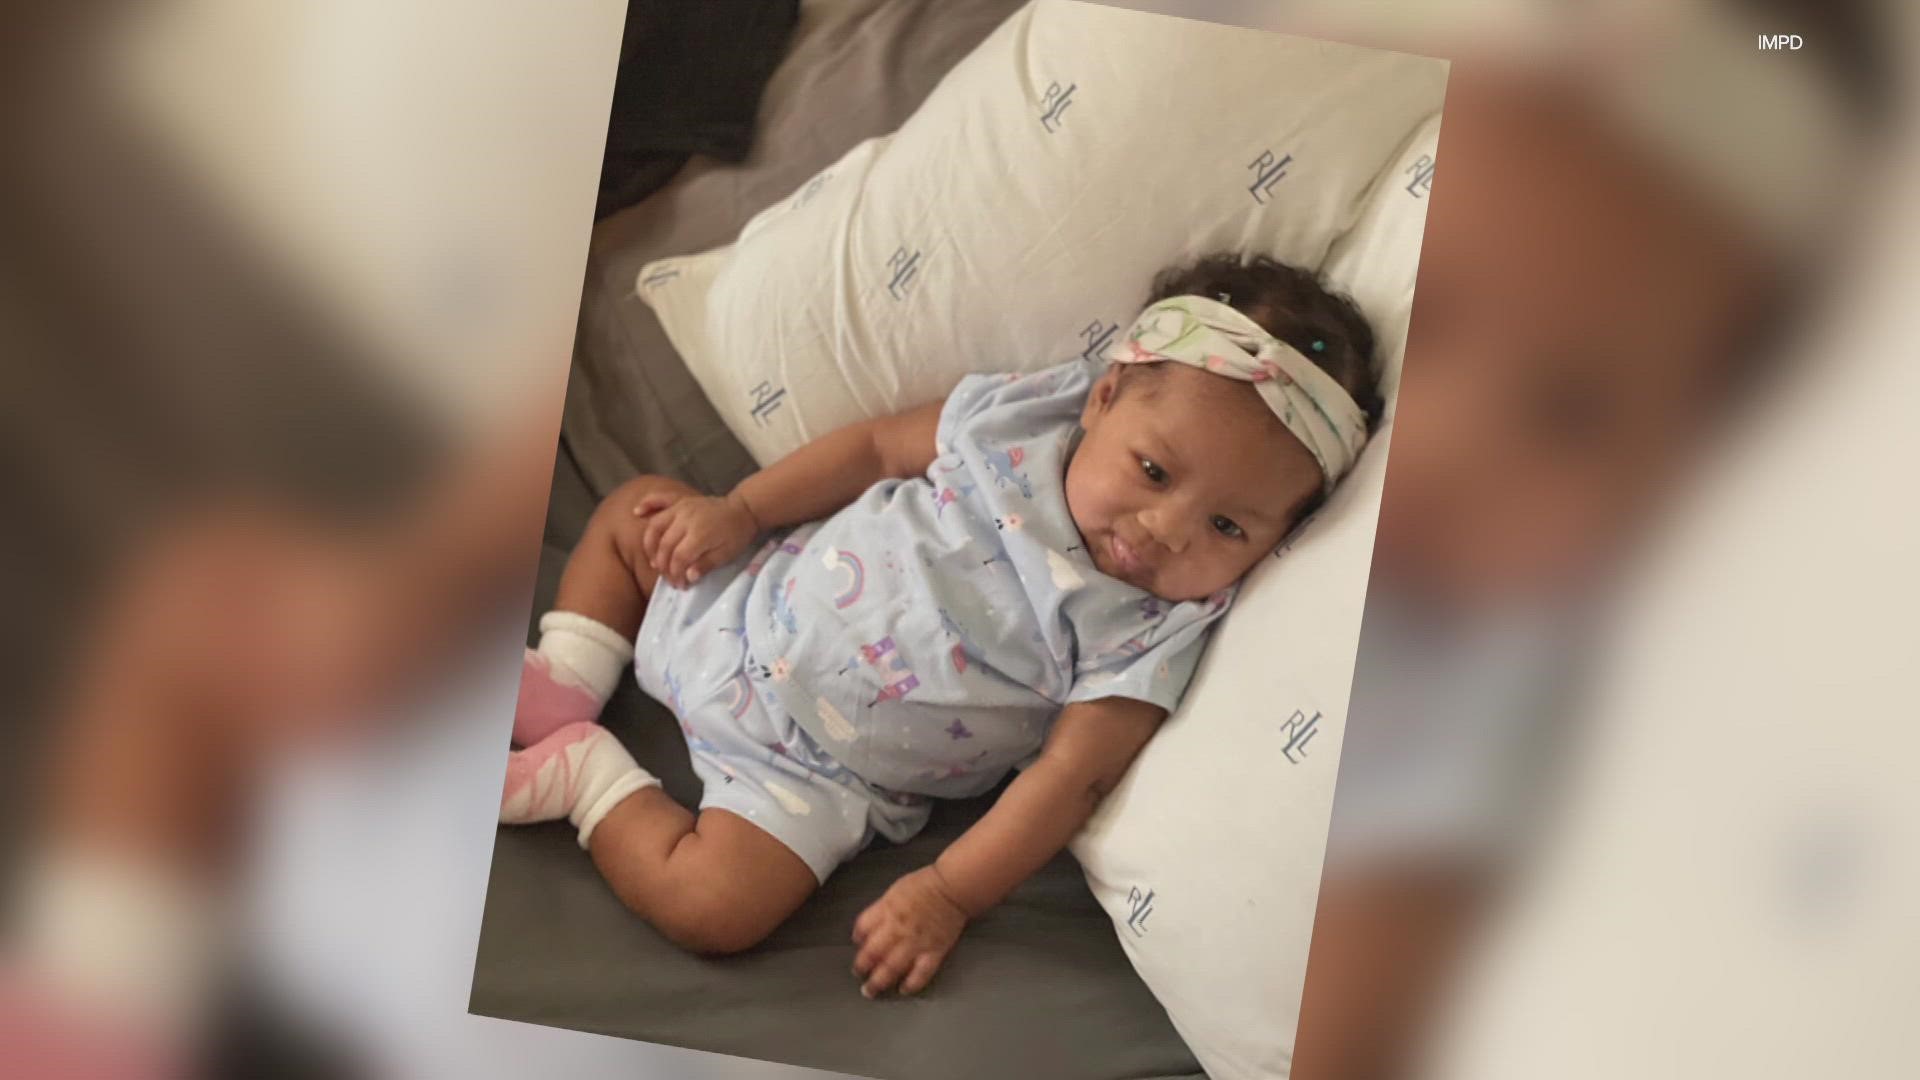 The baby's family is concerned authorities did not issue an Amber Alert for the child, and wondered why her case did not meet criteria.